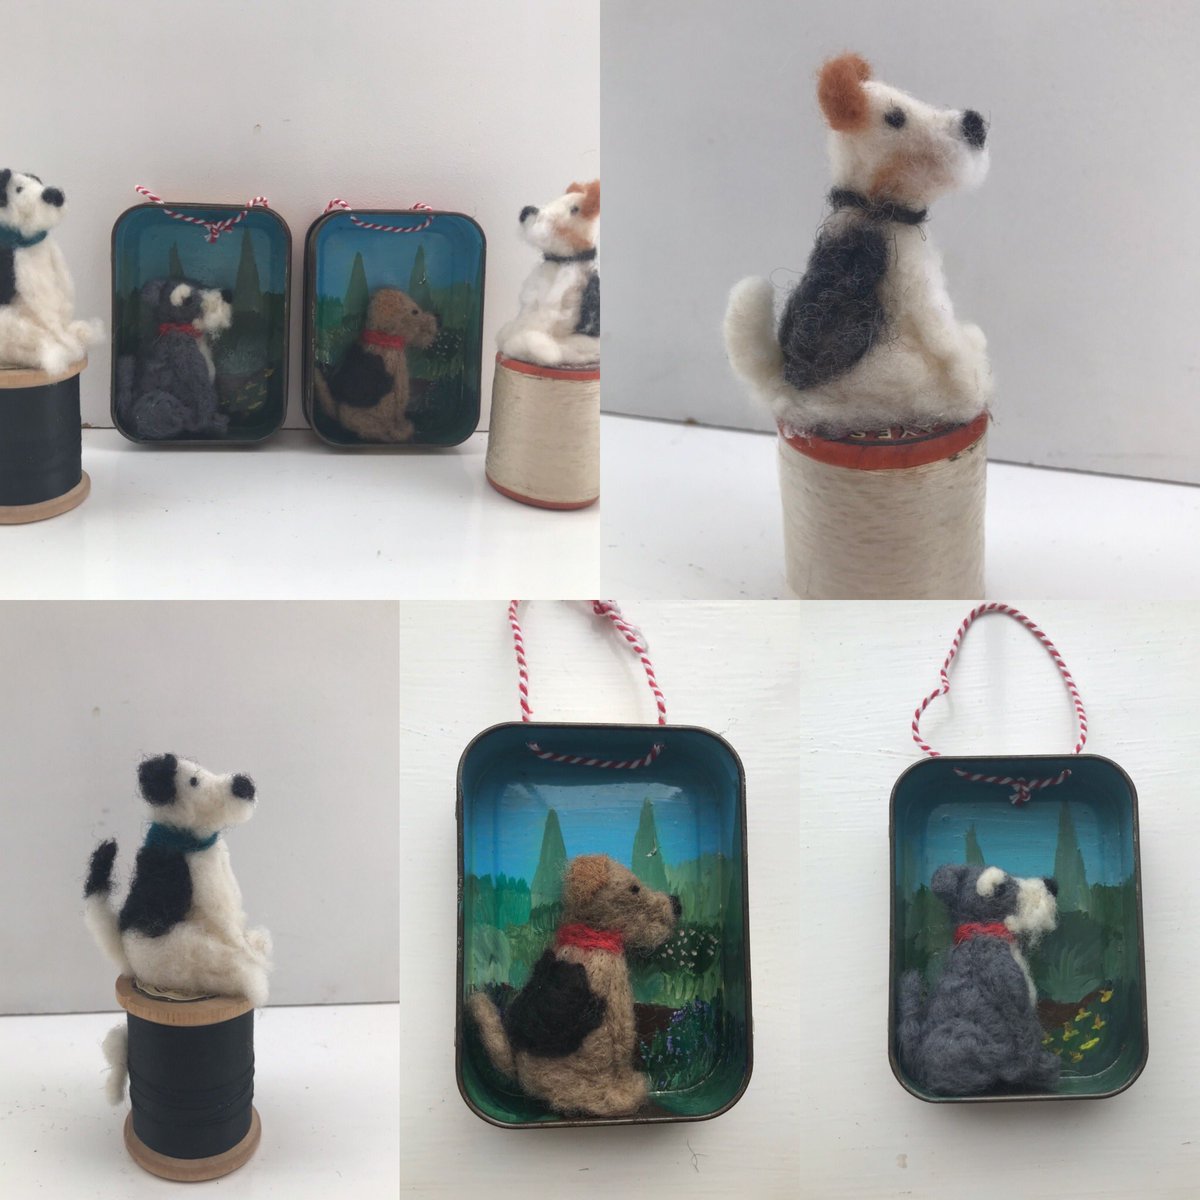 These are naw available ranging from £10-£12 my etsy shop is in my bio lottiesfeltedfriends #etsyuk #etsy #etsyupdate #dogs #ilovedogs #schnauzer #vintage #foxterrier #foxterriersofinstagram #cottonreal #tobaccotin #reasonableprice #art #gifts #etsyshop #handmade